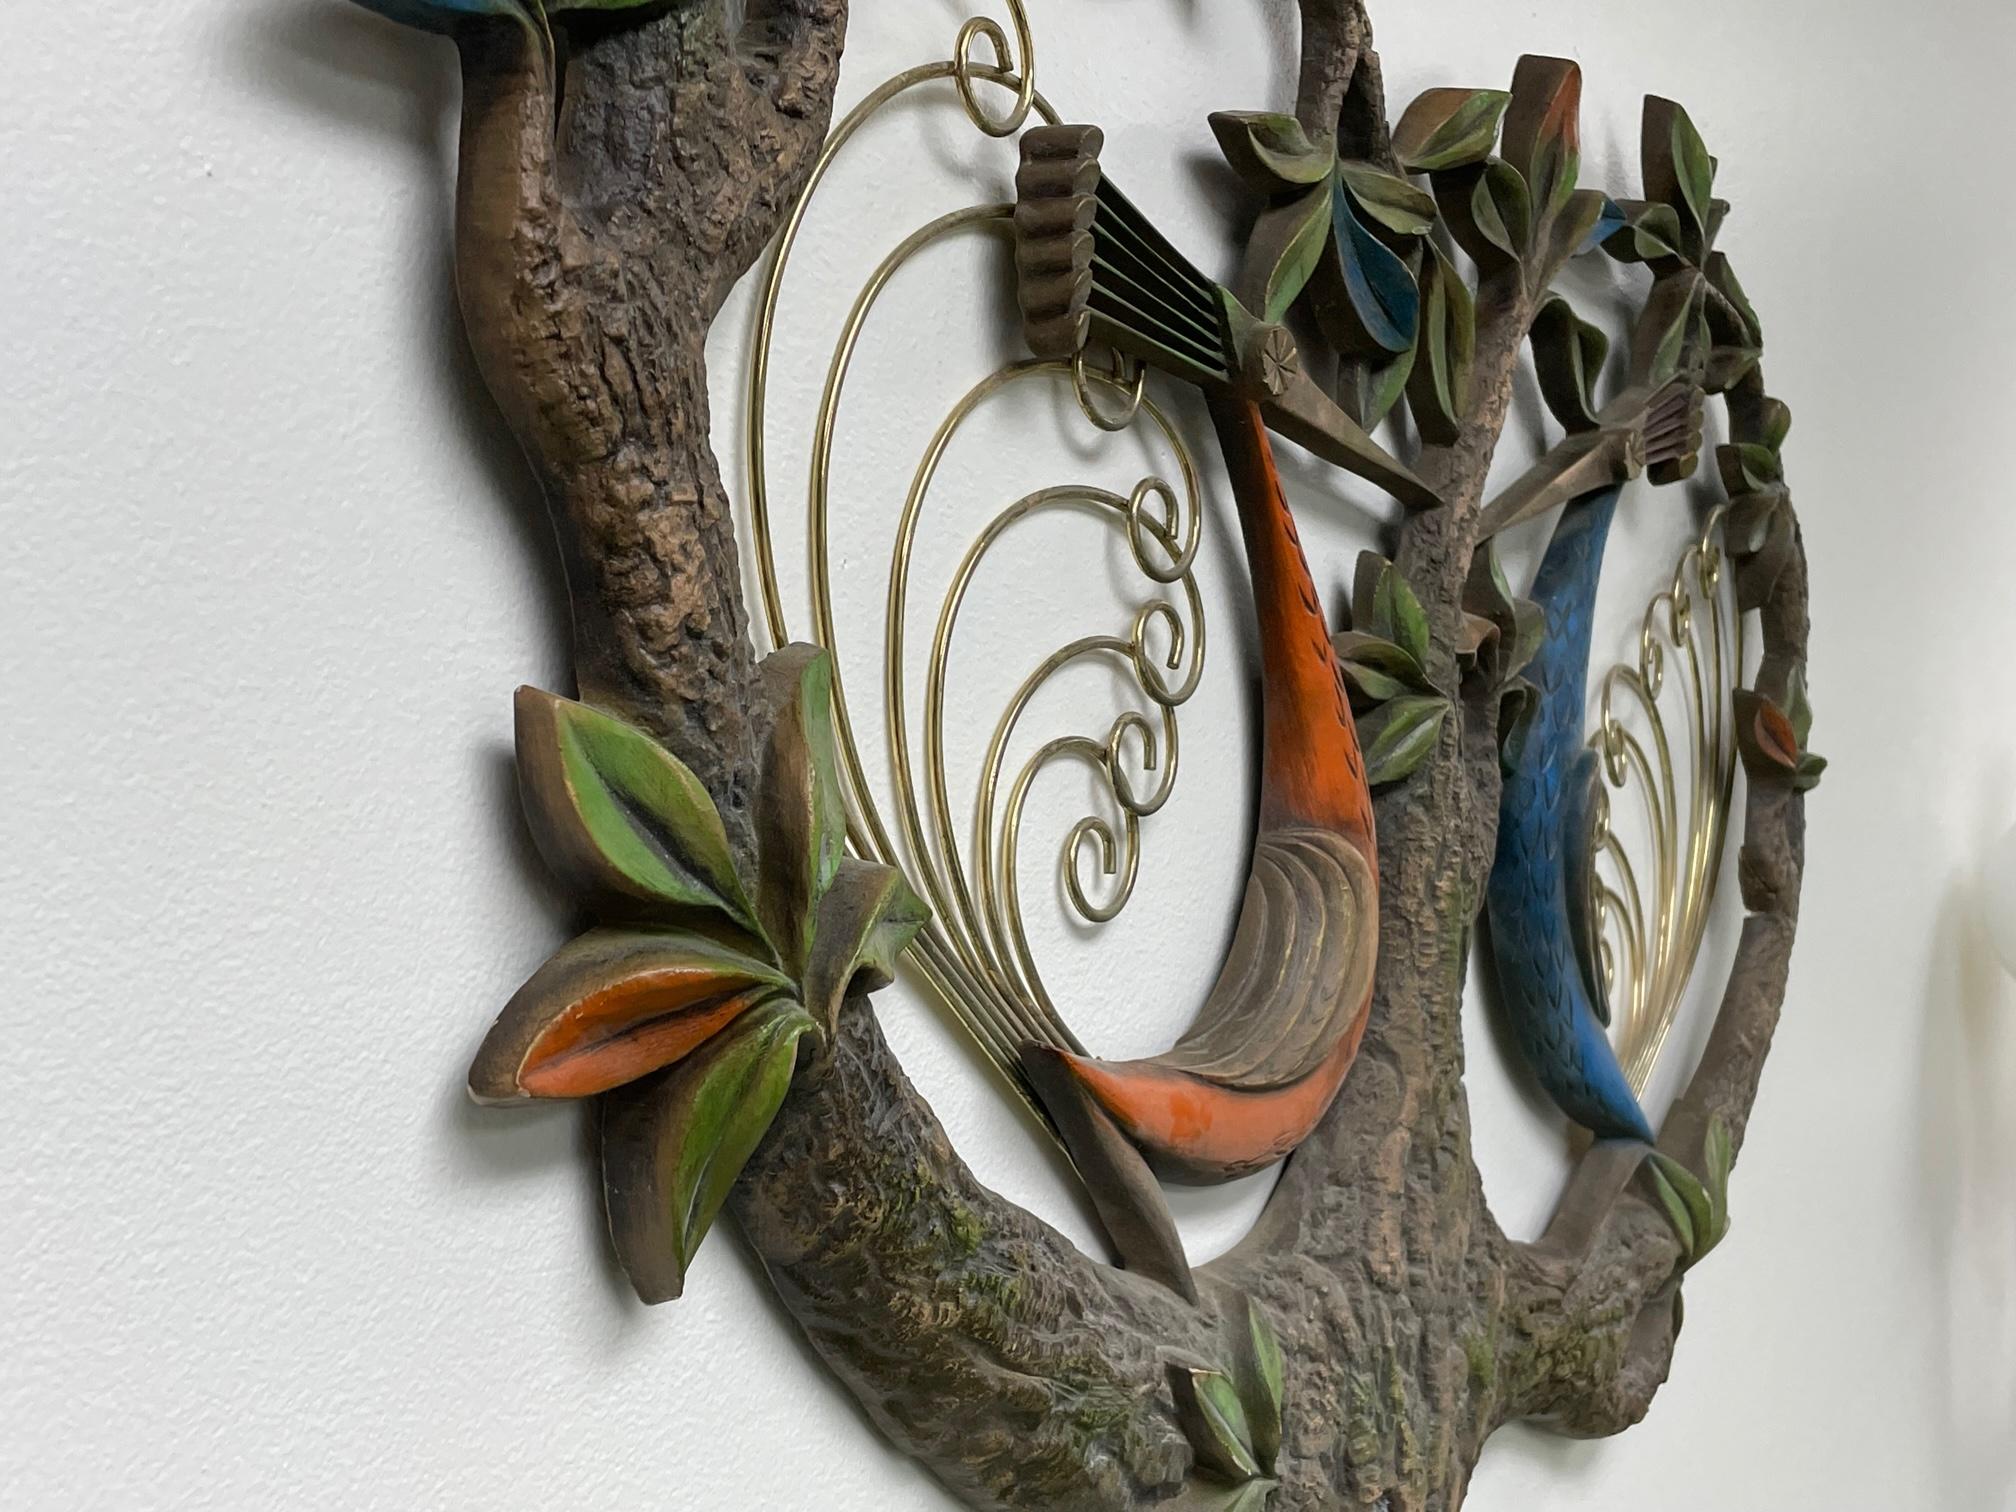 Modernist tropical or tiki style 3D wall hanging features two peacocks with brass tails perched in a tree. Good condition with minor imperfections. Has had small repairs but hard to notice unless looking at back side. See photos for condition